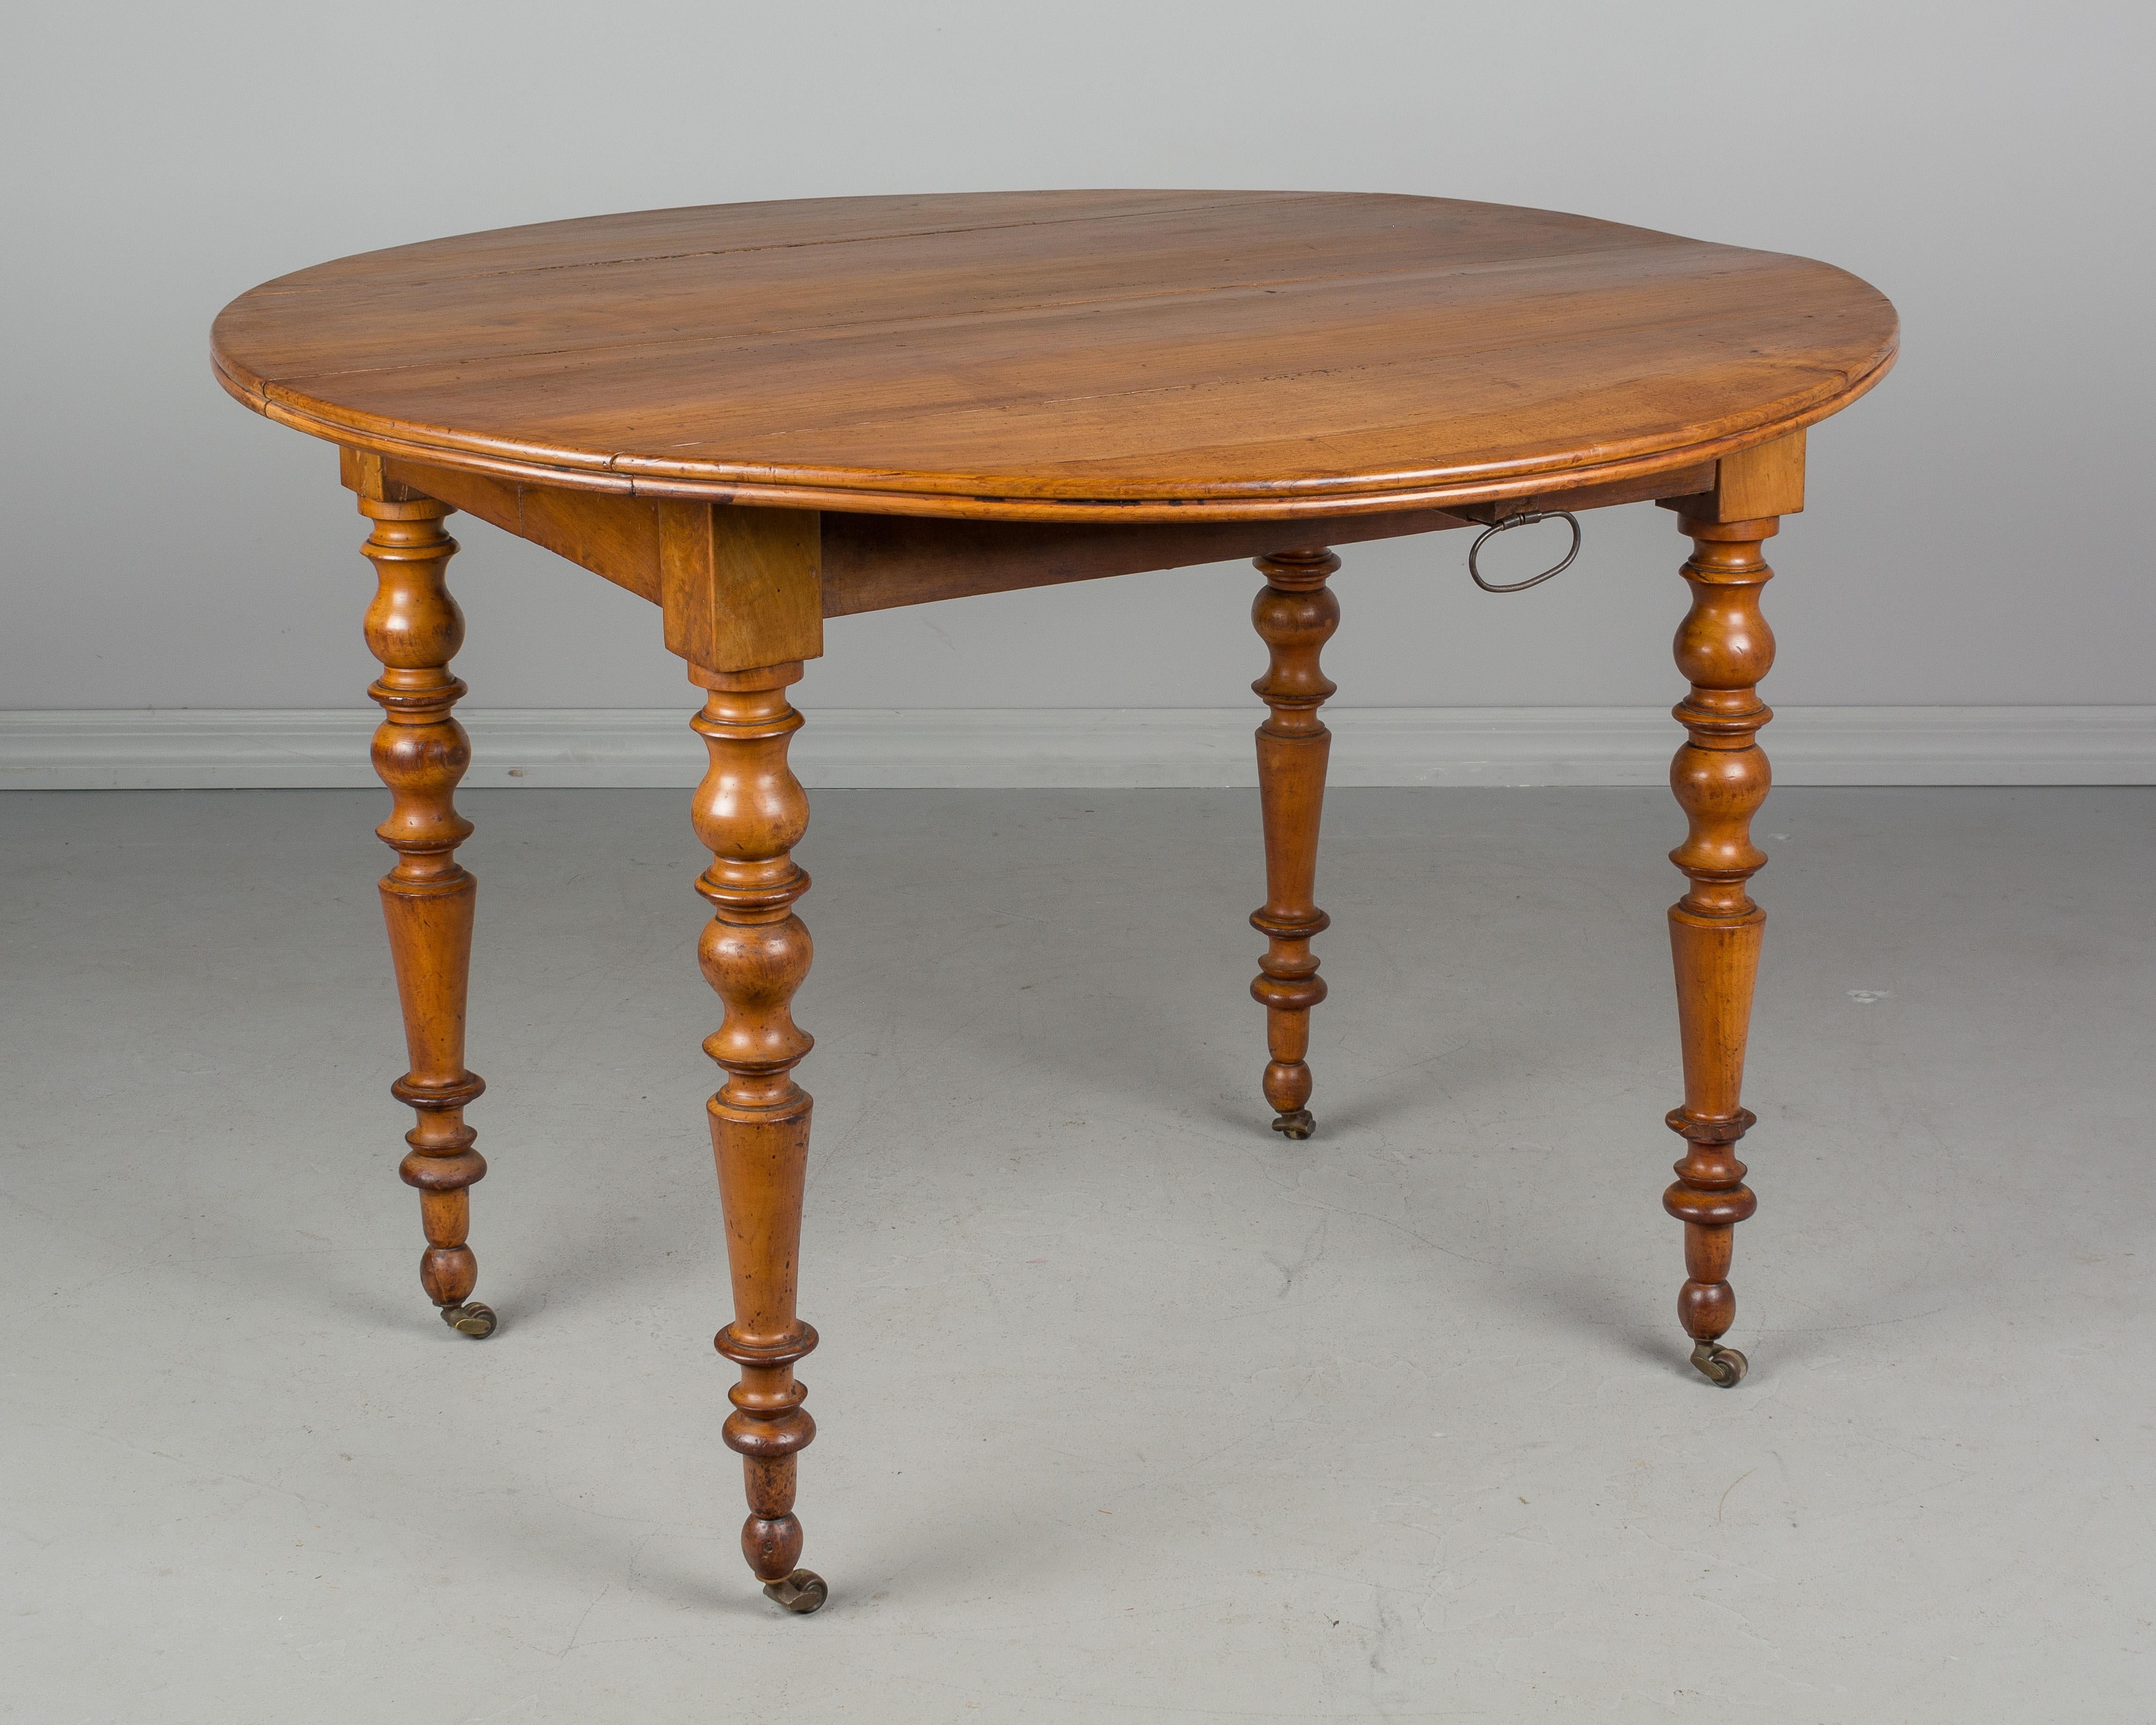 French Drop-Leaf Dining Table (Messing)